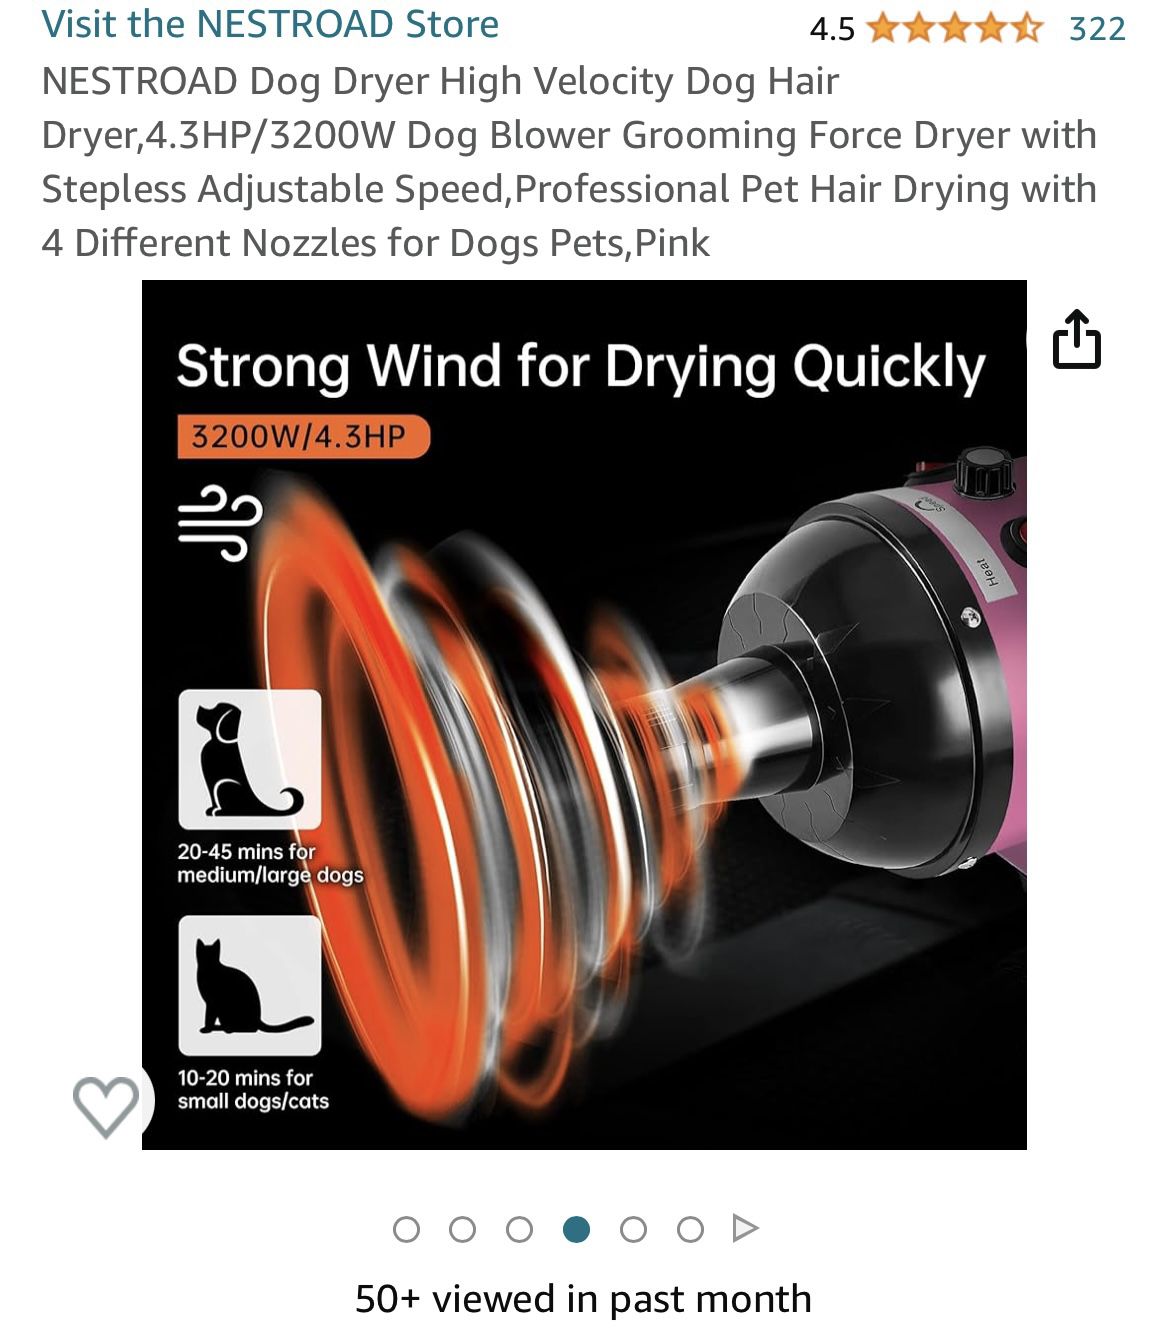 Dog Blower Grooming Force Dryer In The Box!